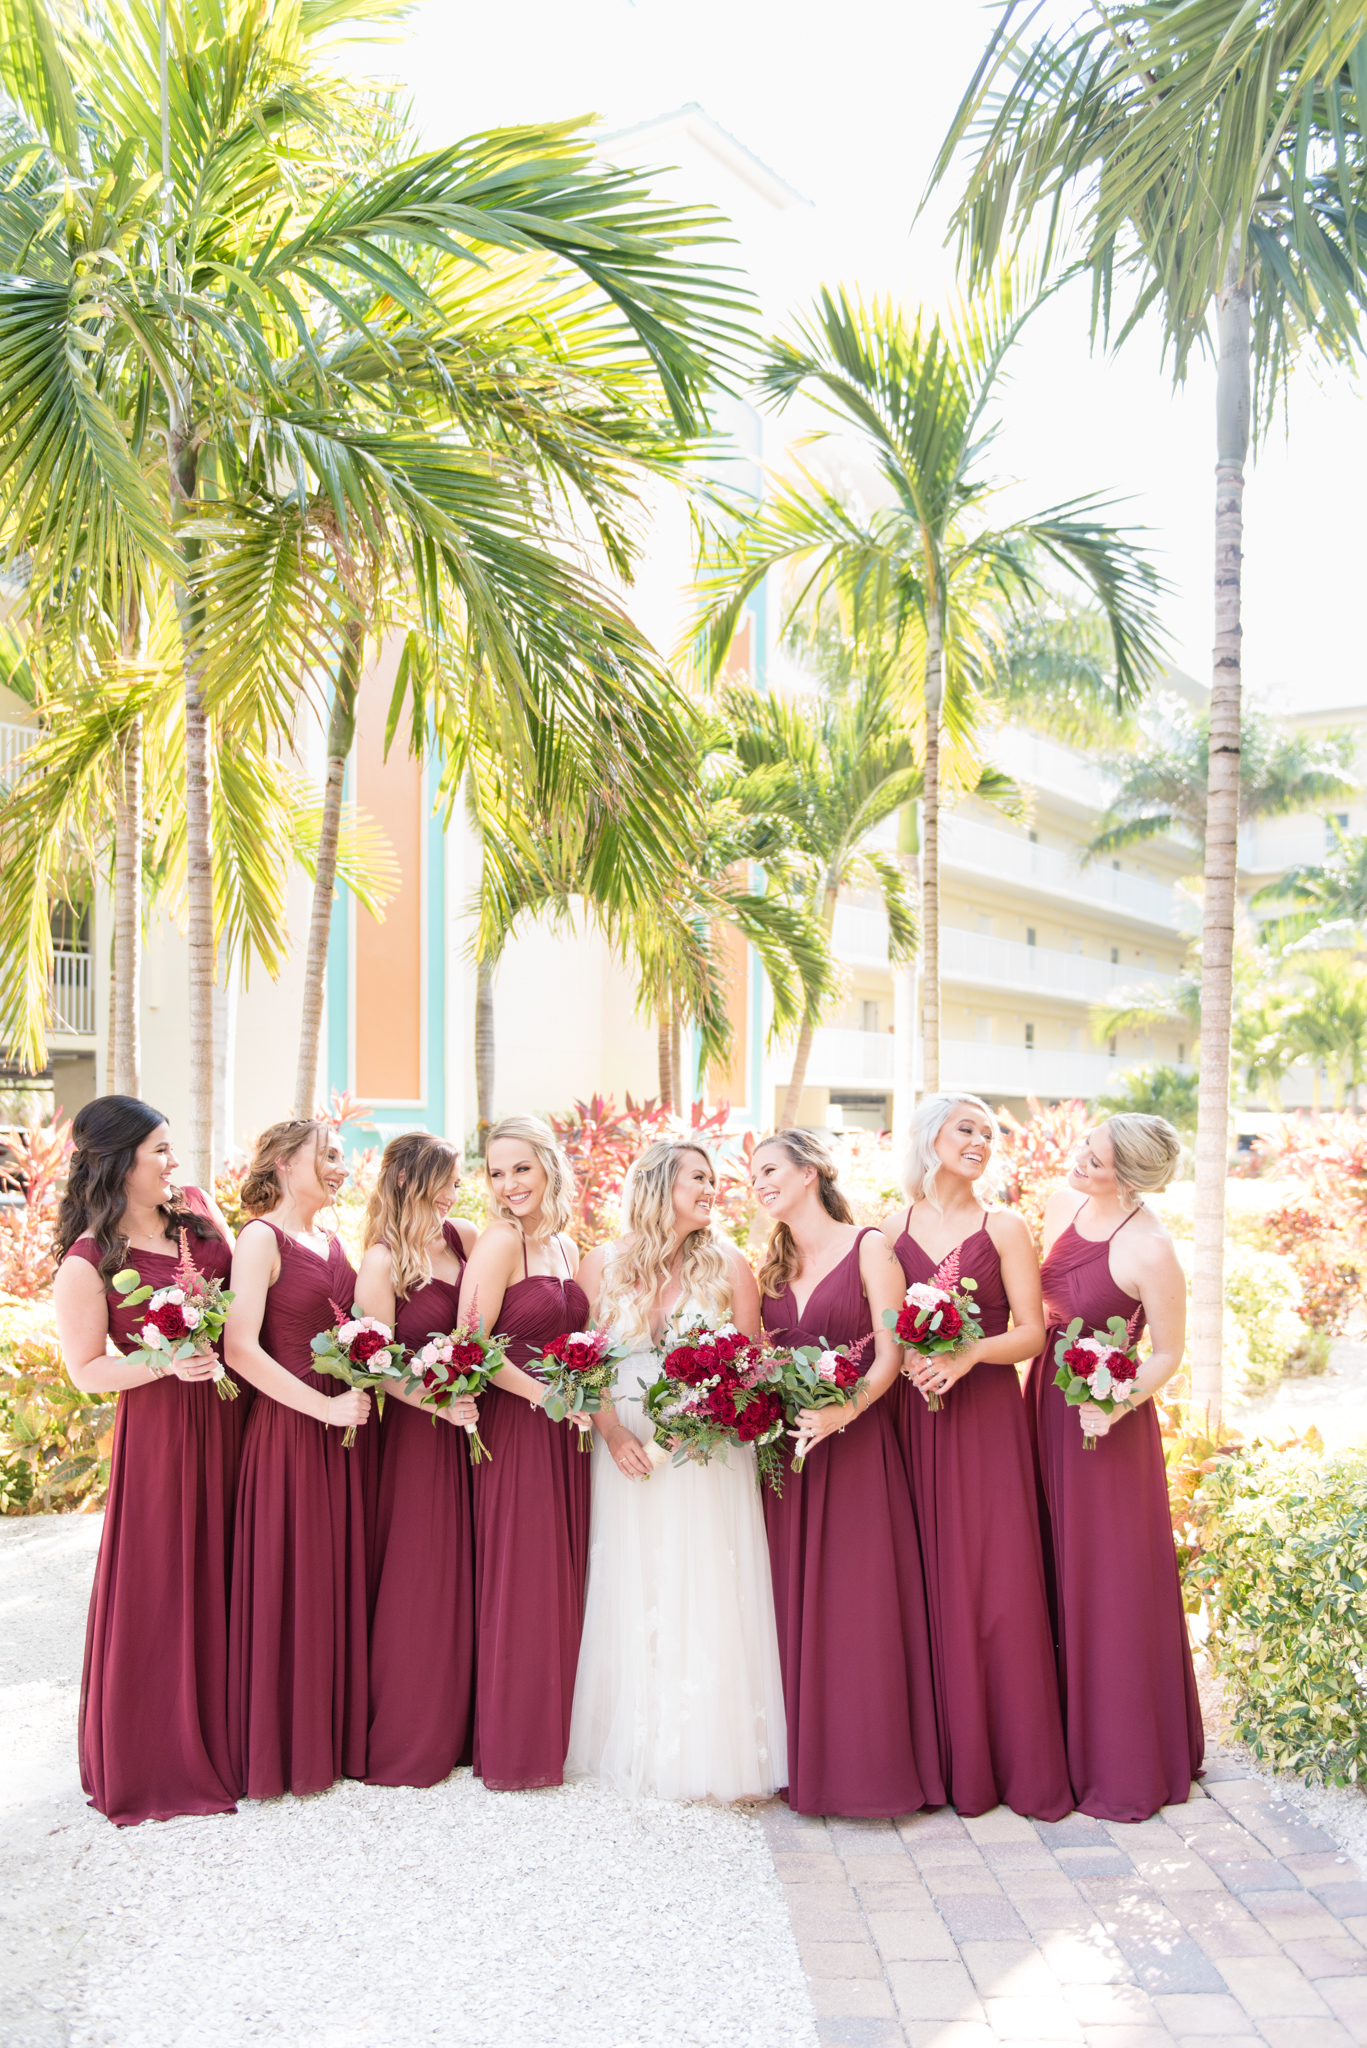 Bridal party laughs together.